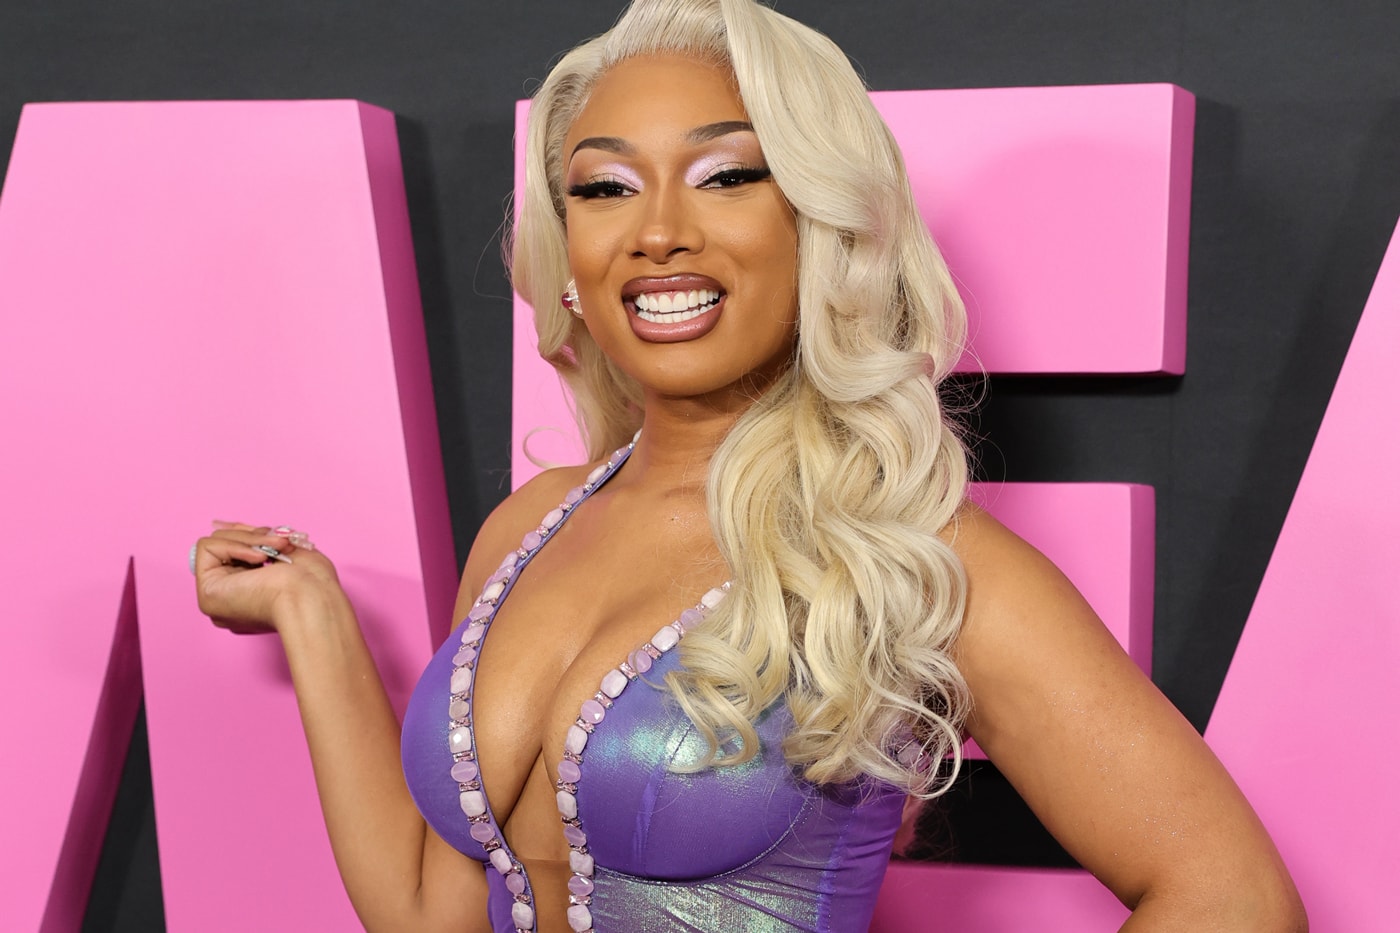 11) From one hot girl to another: We see you Megan Thee Stallion